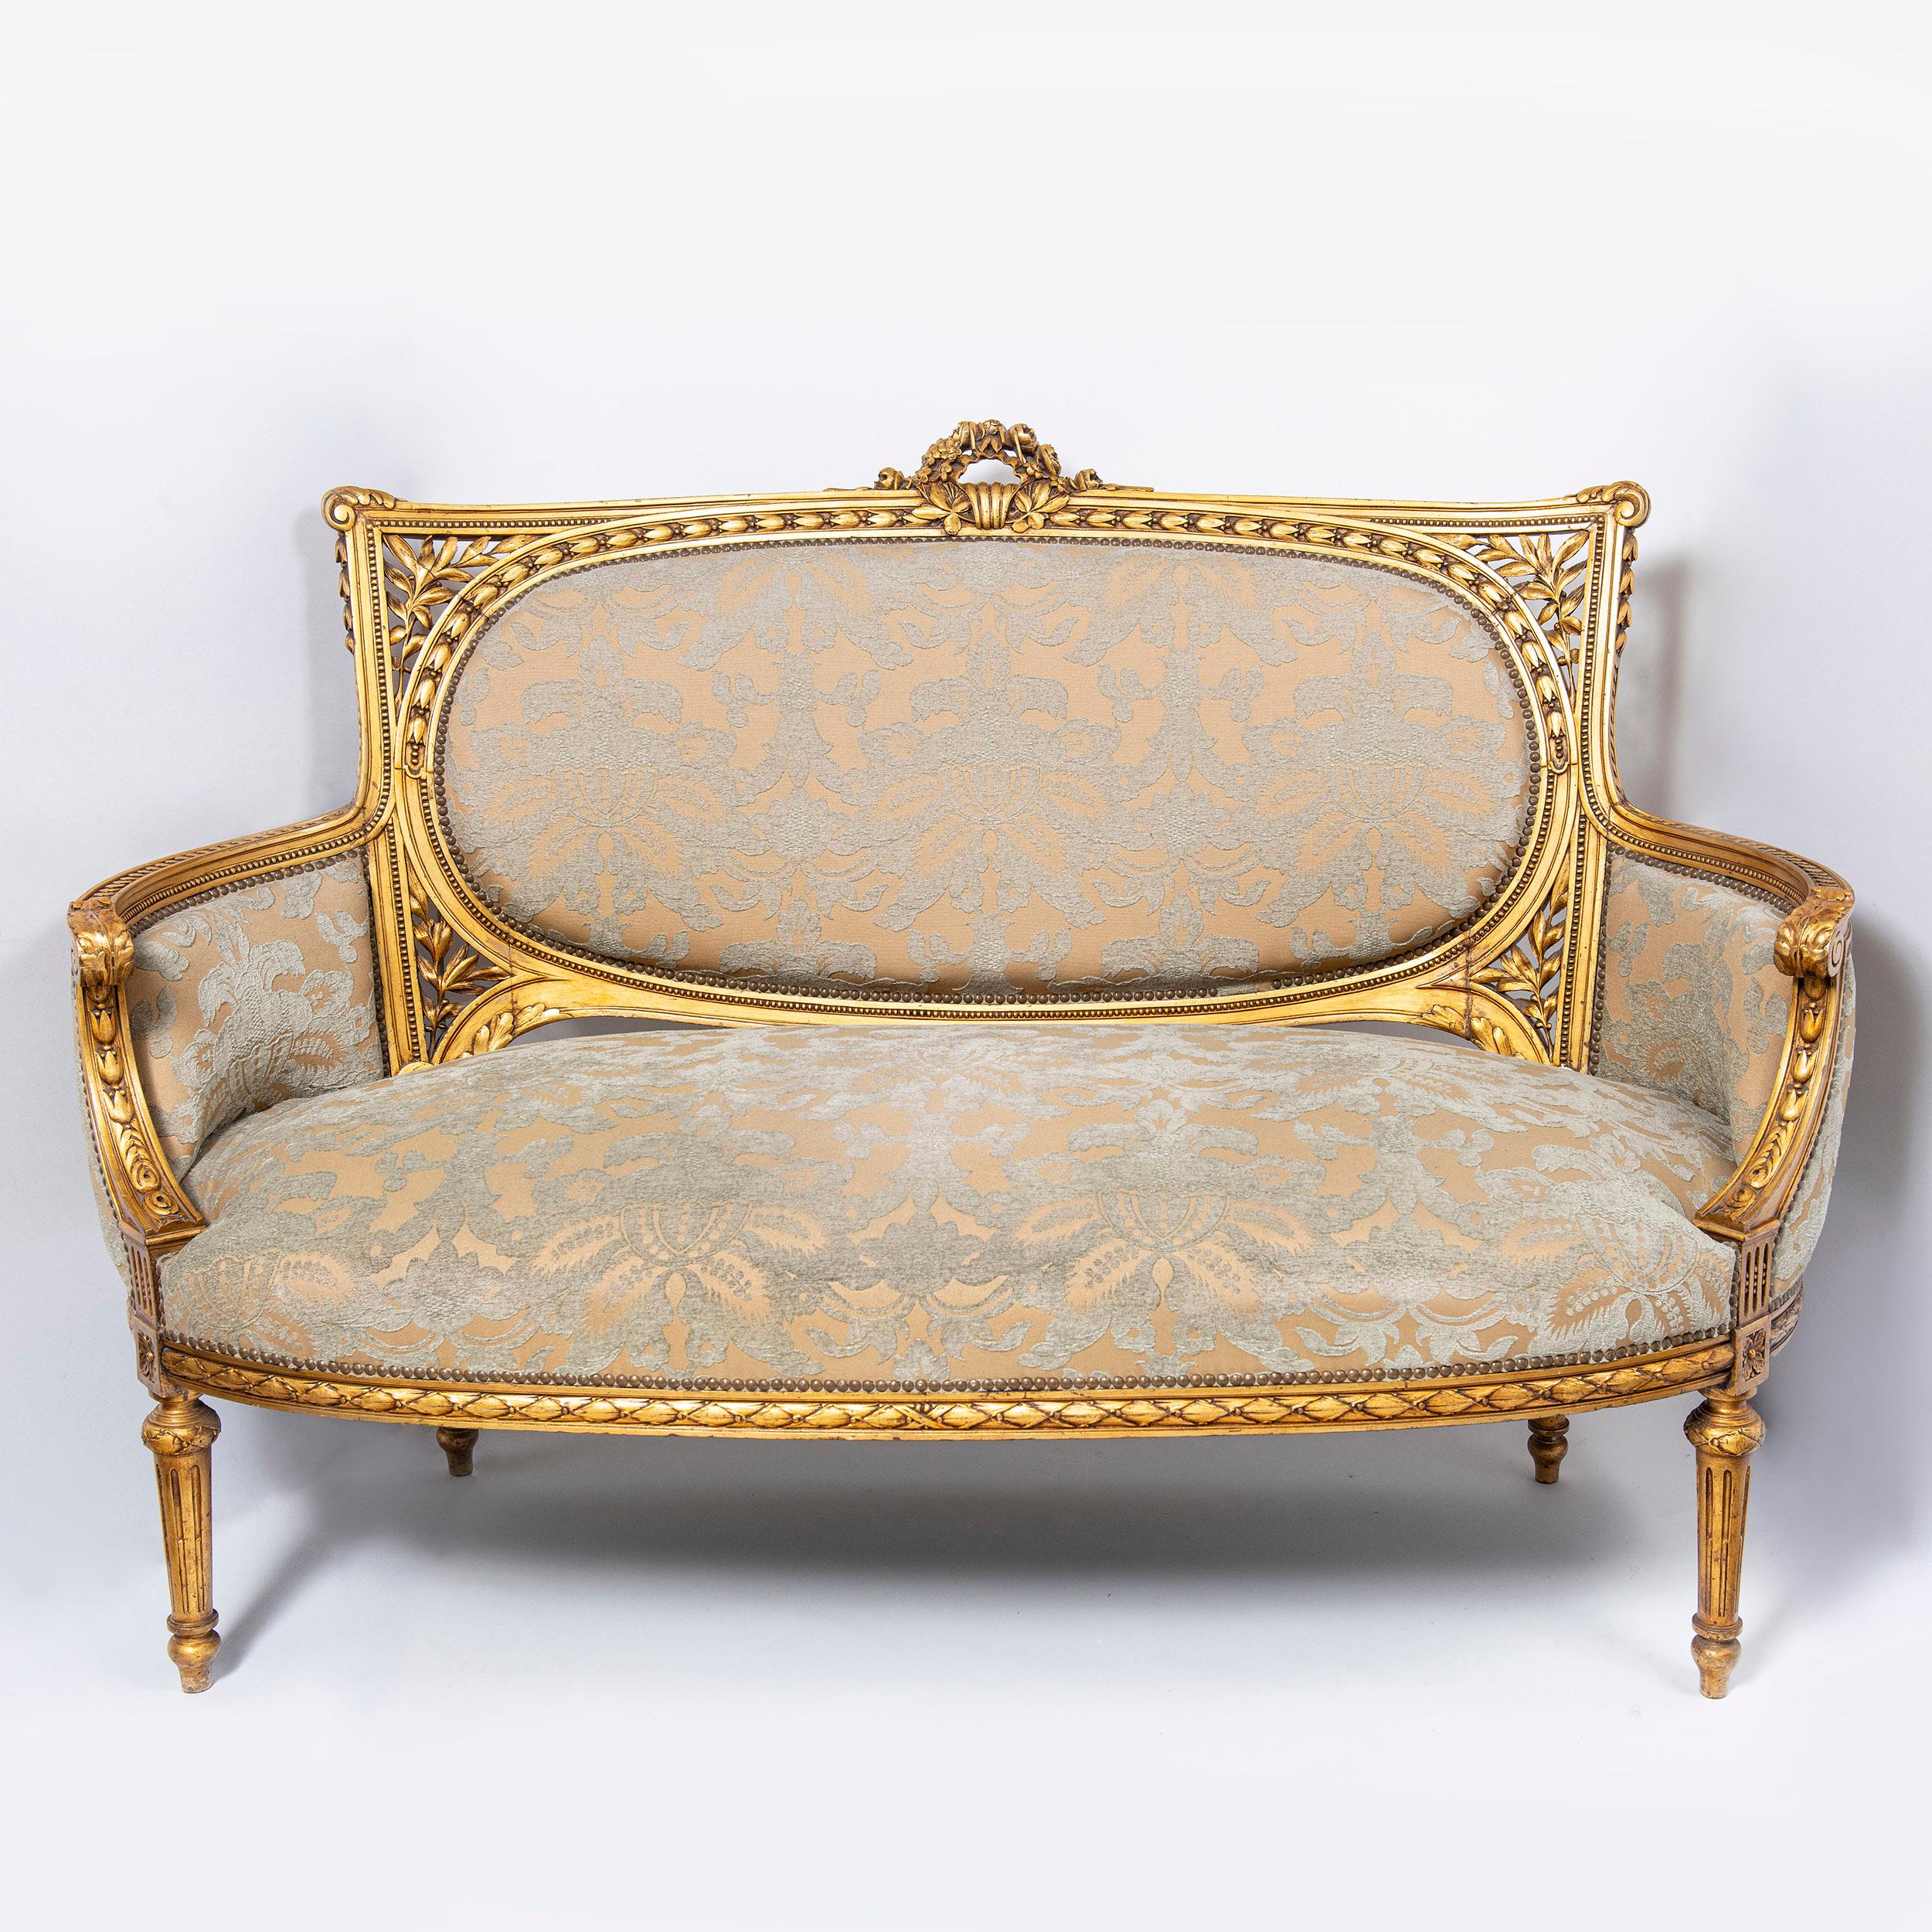 Patinated wood and gold leaf seven pieces suit. Attributed to Maison Jansen, France, late 19th century.
One large sofa, two armchairs and four chairs.

Dimensions: 
Large sofa: 106 cm height, 153 cm width, 80 cm depth, 59 cm seat height. 
Armchairs: